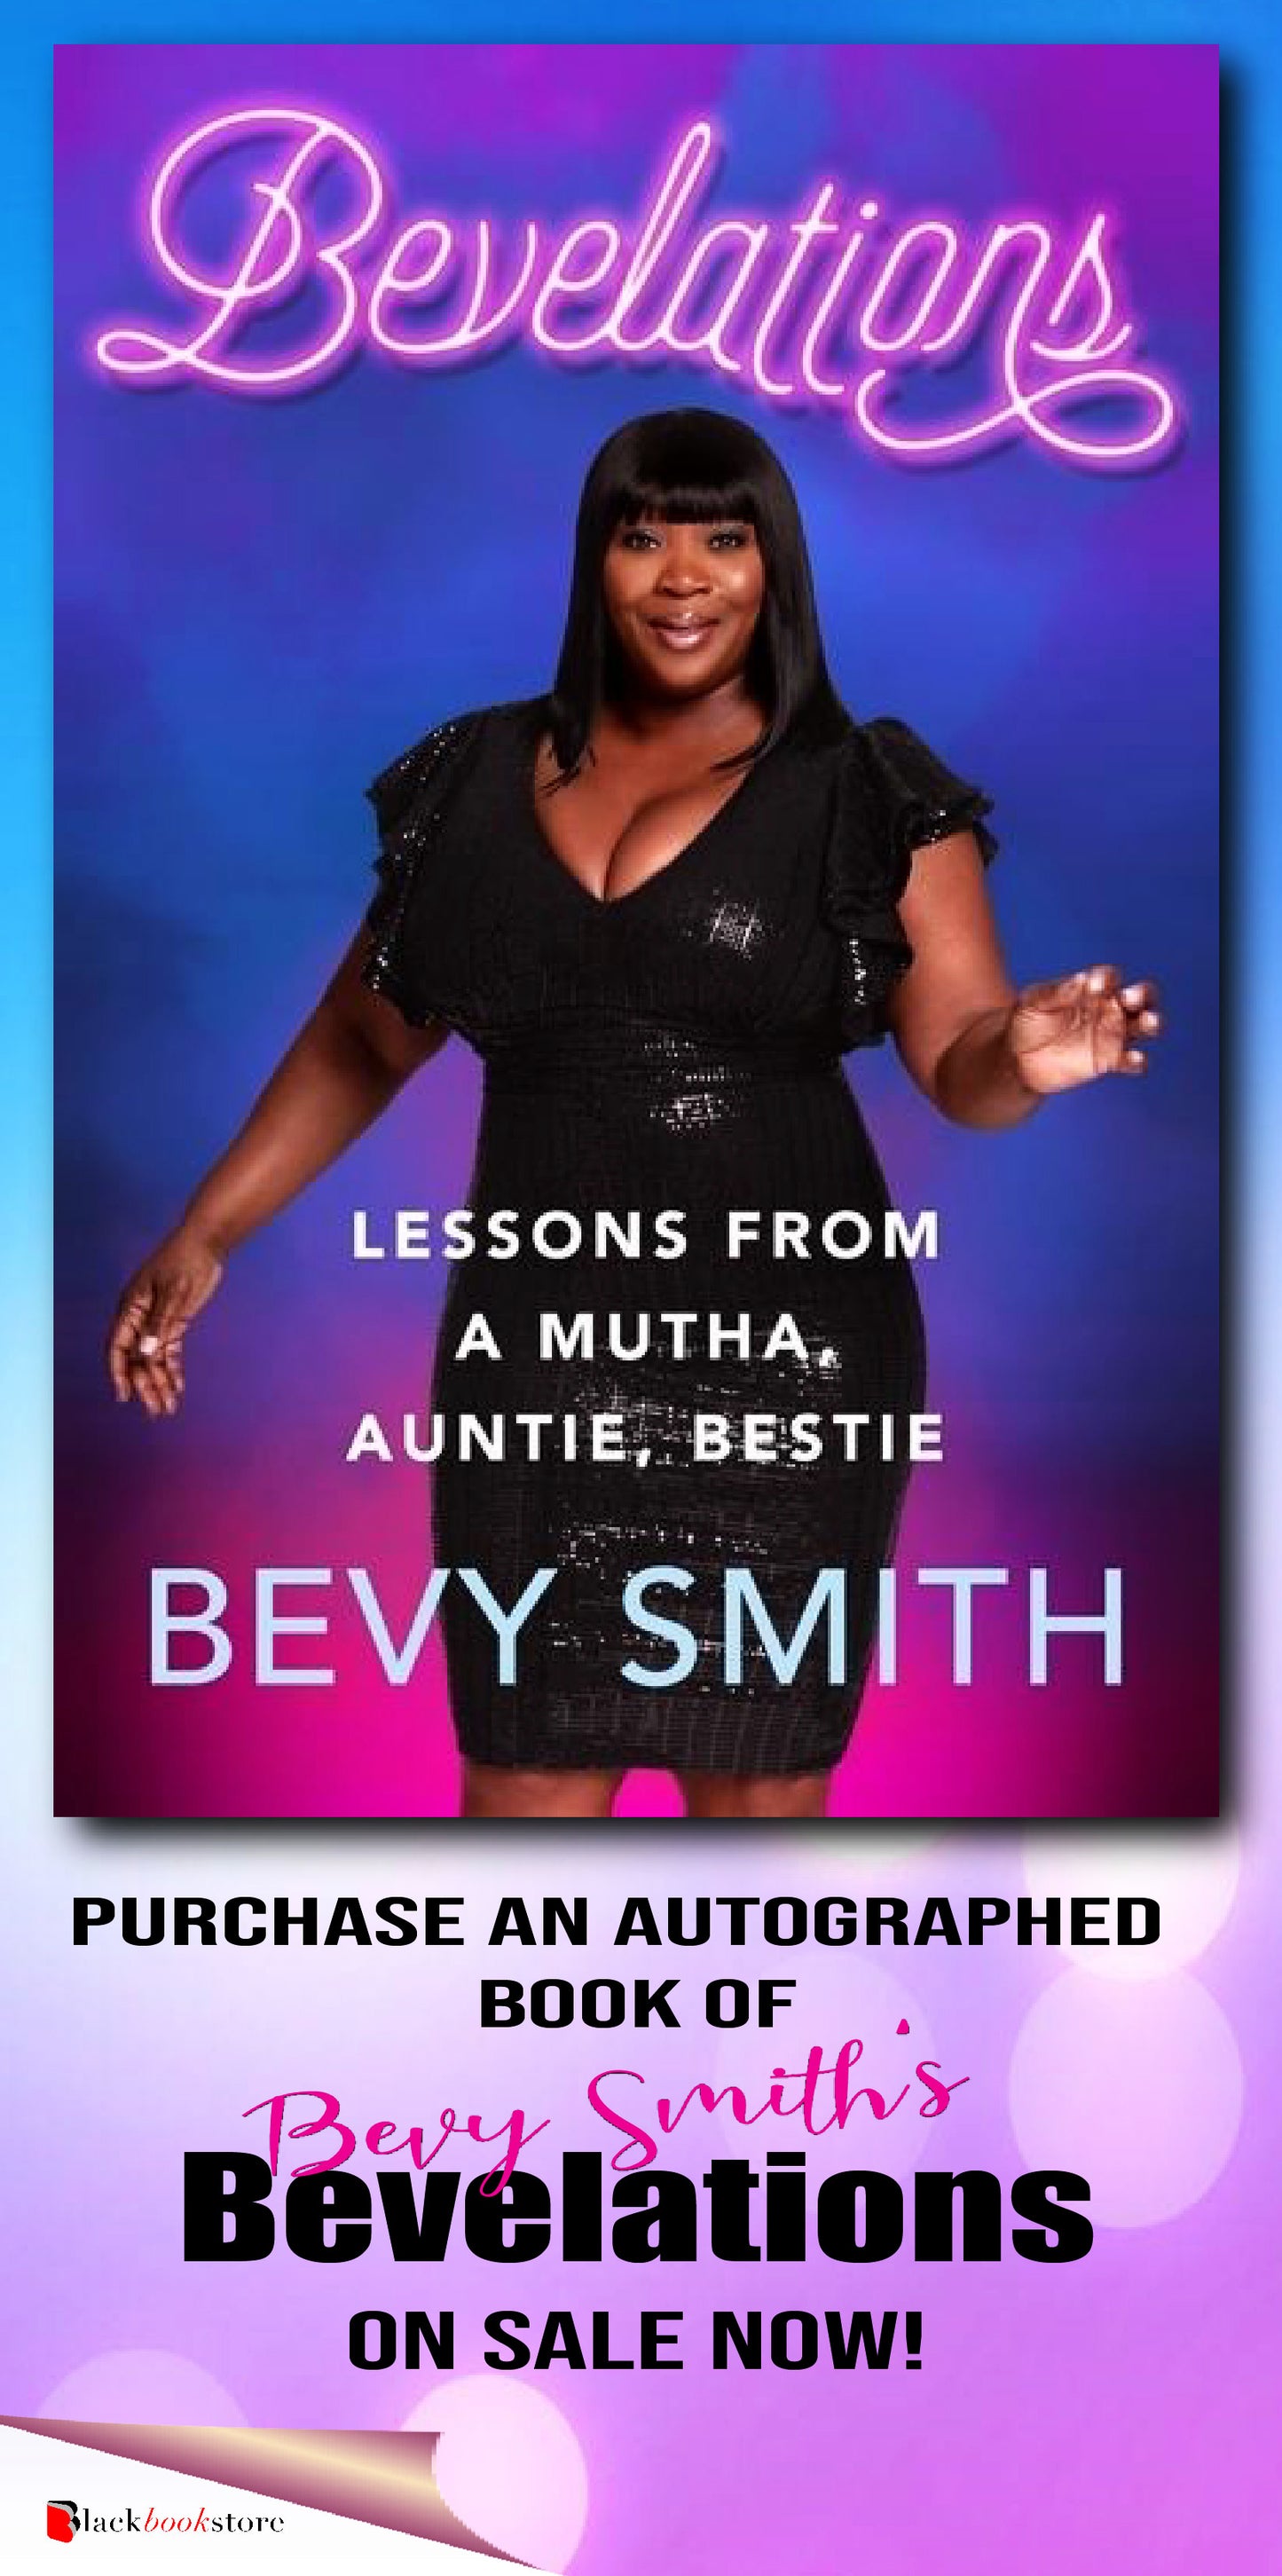 Bevy Smith - Bevelations - Autographed Book